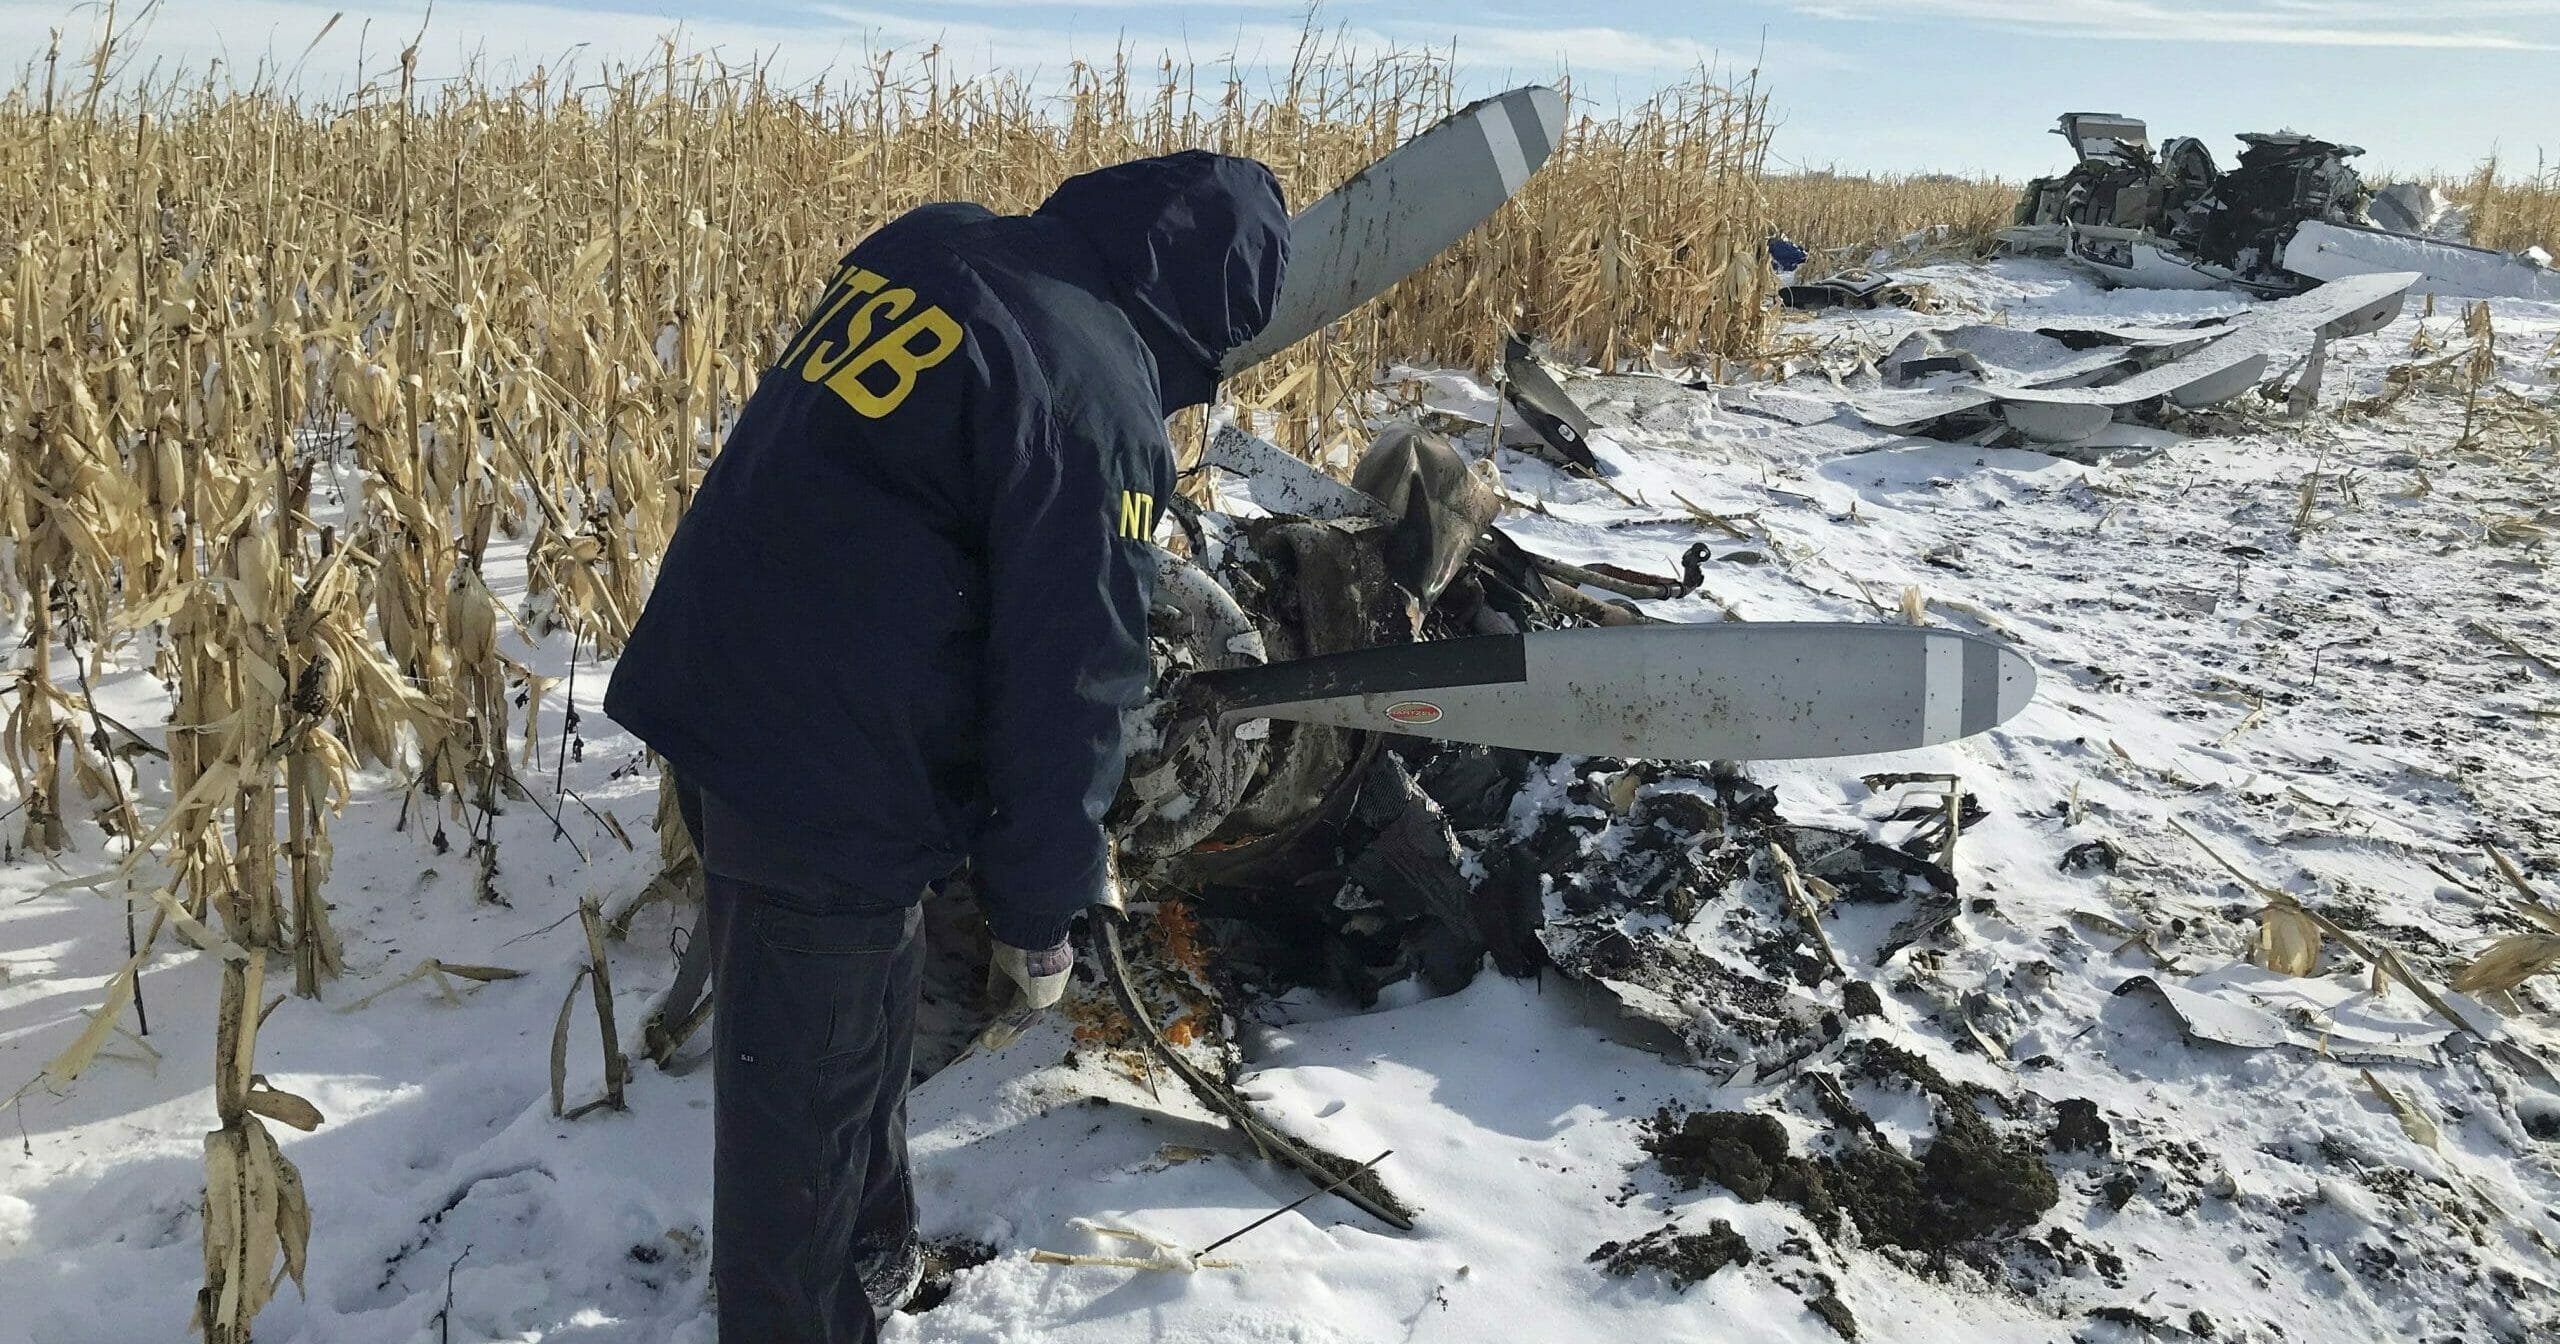 A National Transportation Safety Board air safety investigator begins the initial examination Dec. 2, 2019, of the wreckage of the Pilatus PC-12 that crashed in Chamberlain, South Dakota, on Nov. 30, 2019.